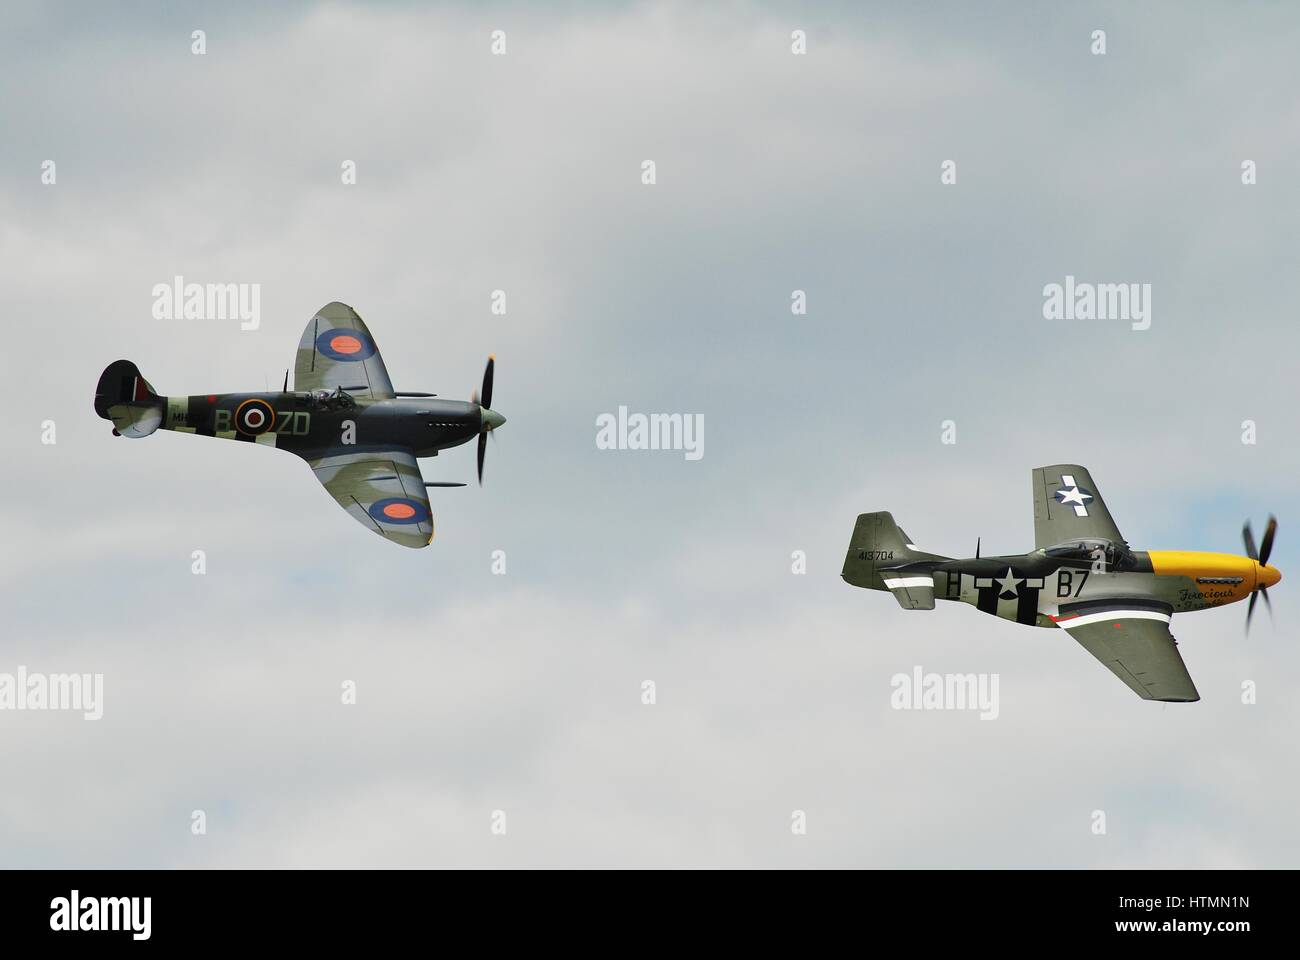 Mustang P51D fighter Ferocious Frankie leads Vickers Spitfire fighter MH434 at the Dunsfold airshow in Surrey, England. Both aircraft date from WW2. Stock Photo